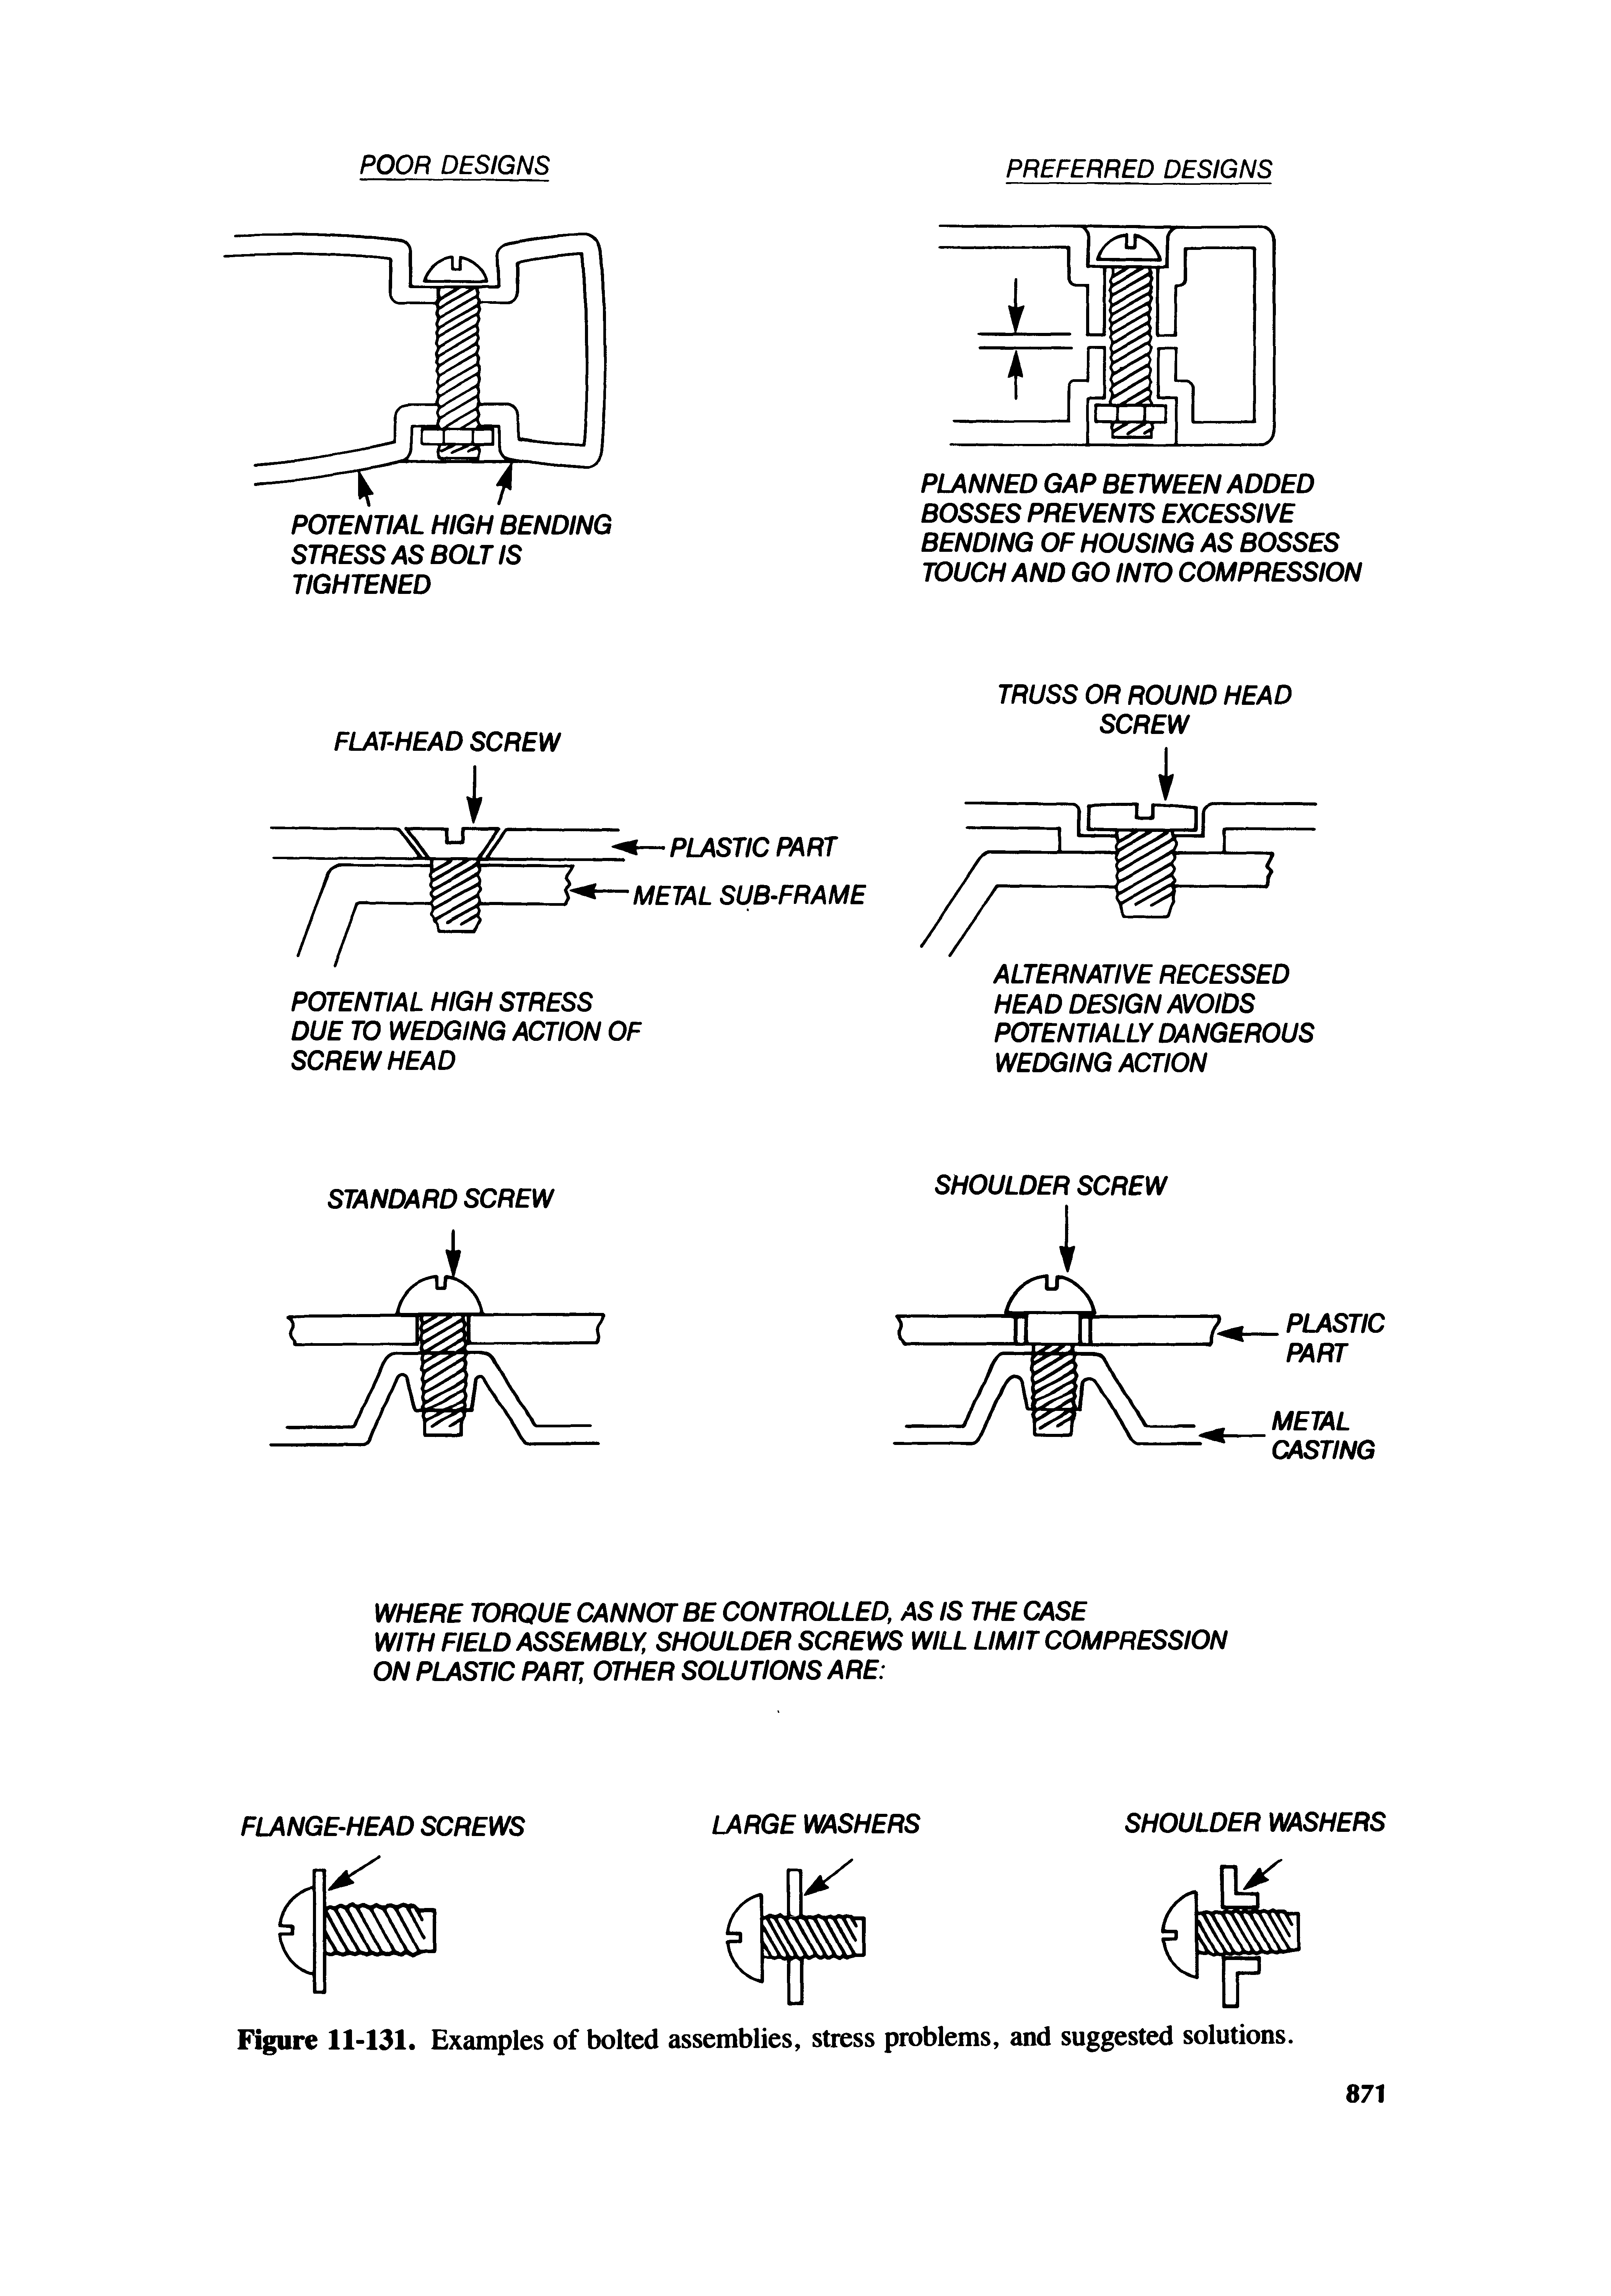 Figure 11-131. Examples of bolted assemblies, stress problems, and suggested solutions.